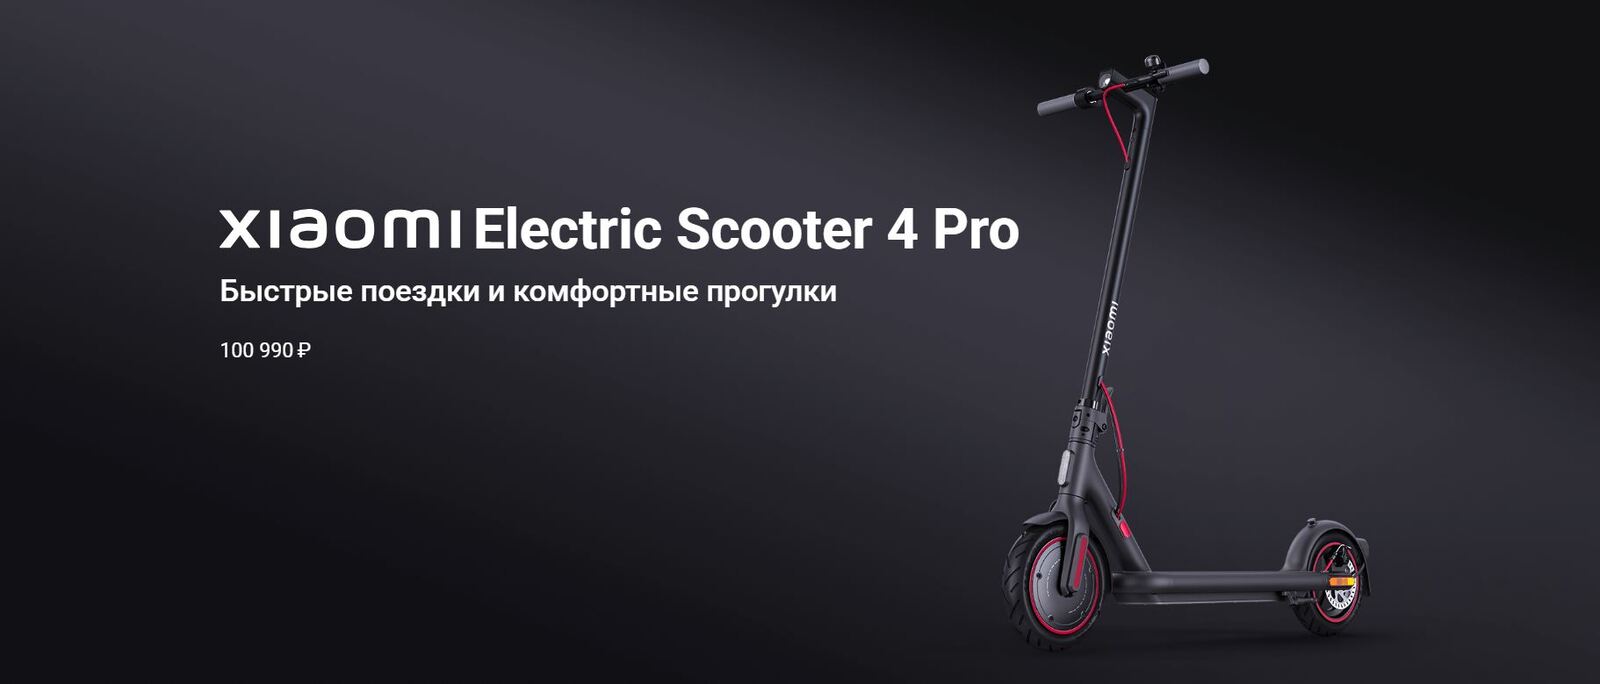 Электросамокат Xiaomi Electric Scooter 4 Pro.